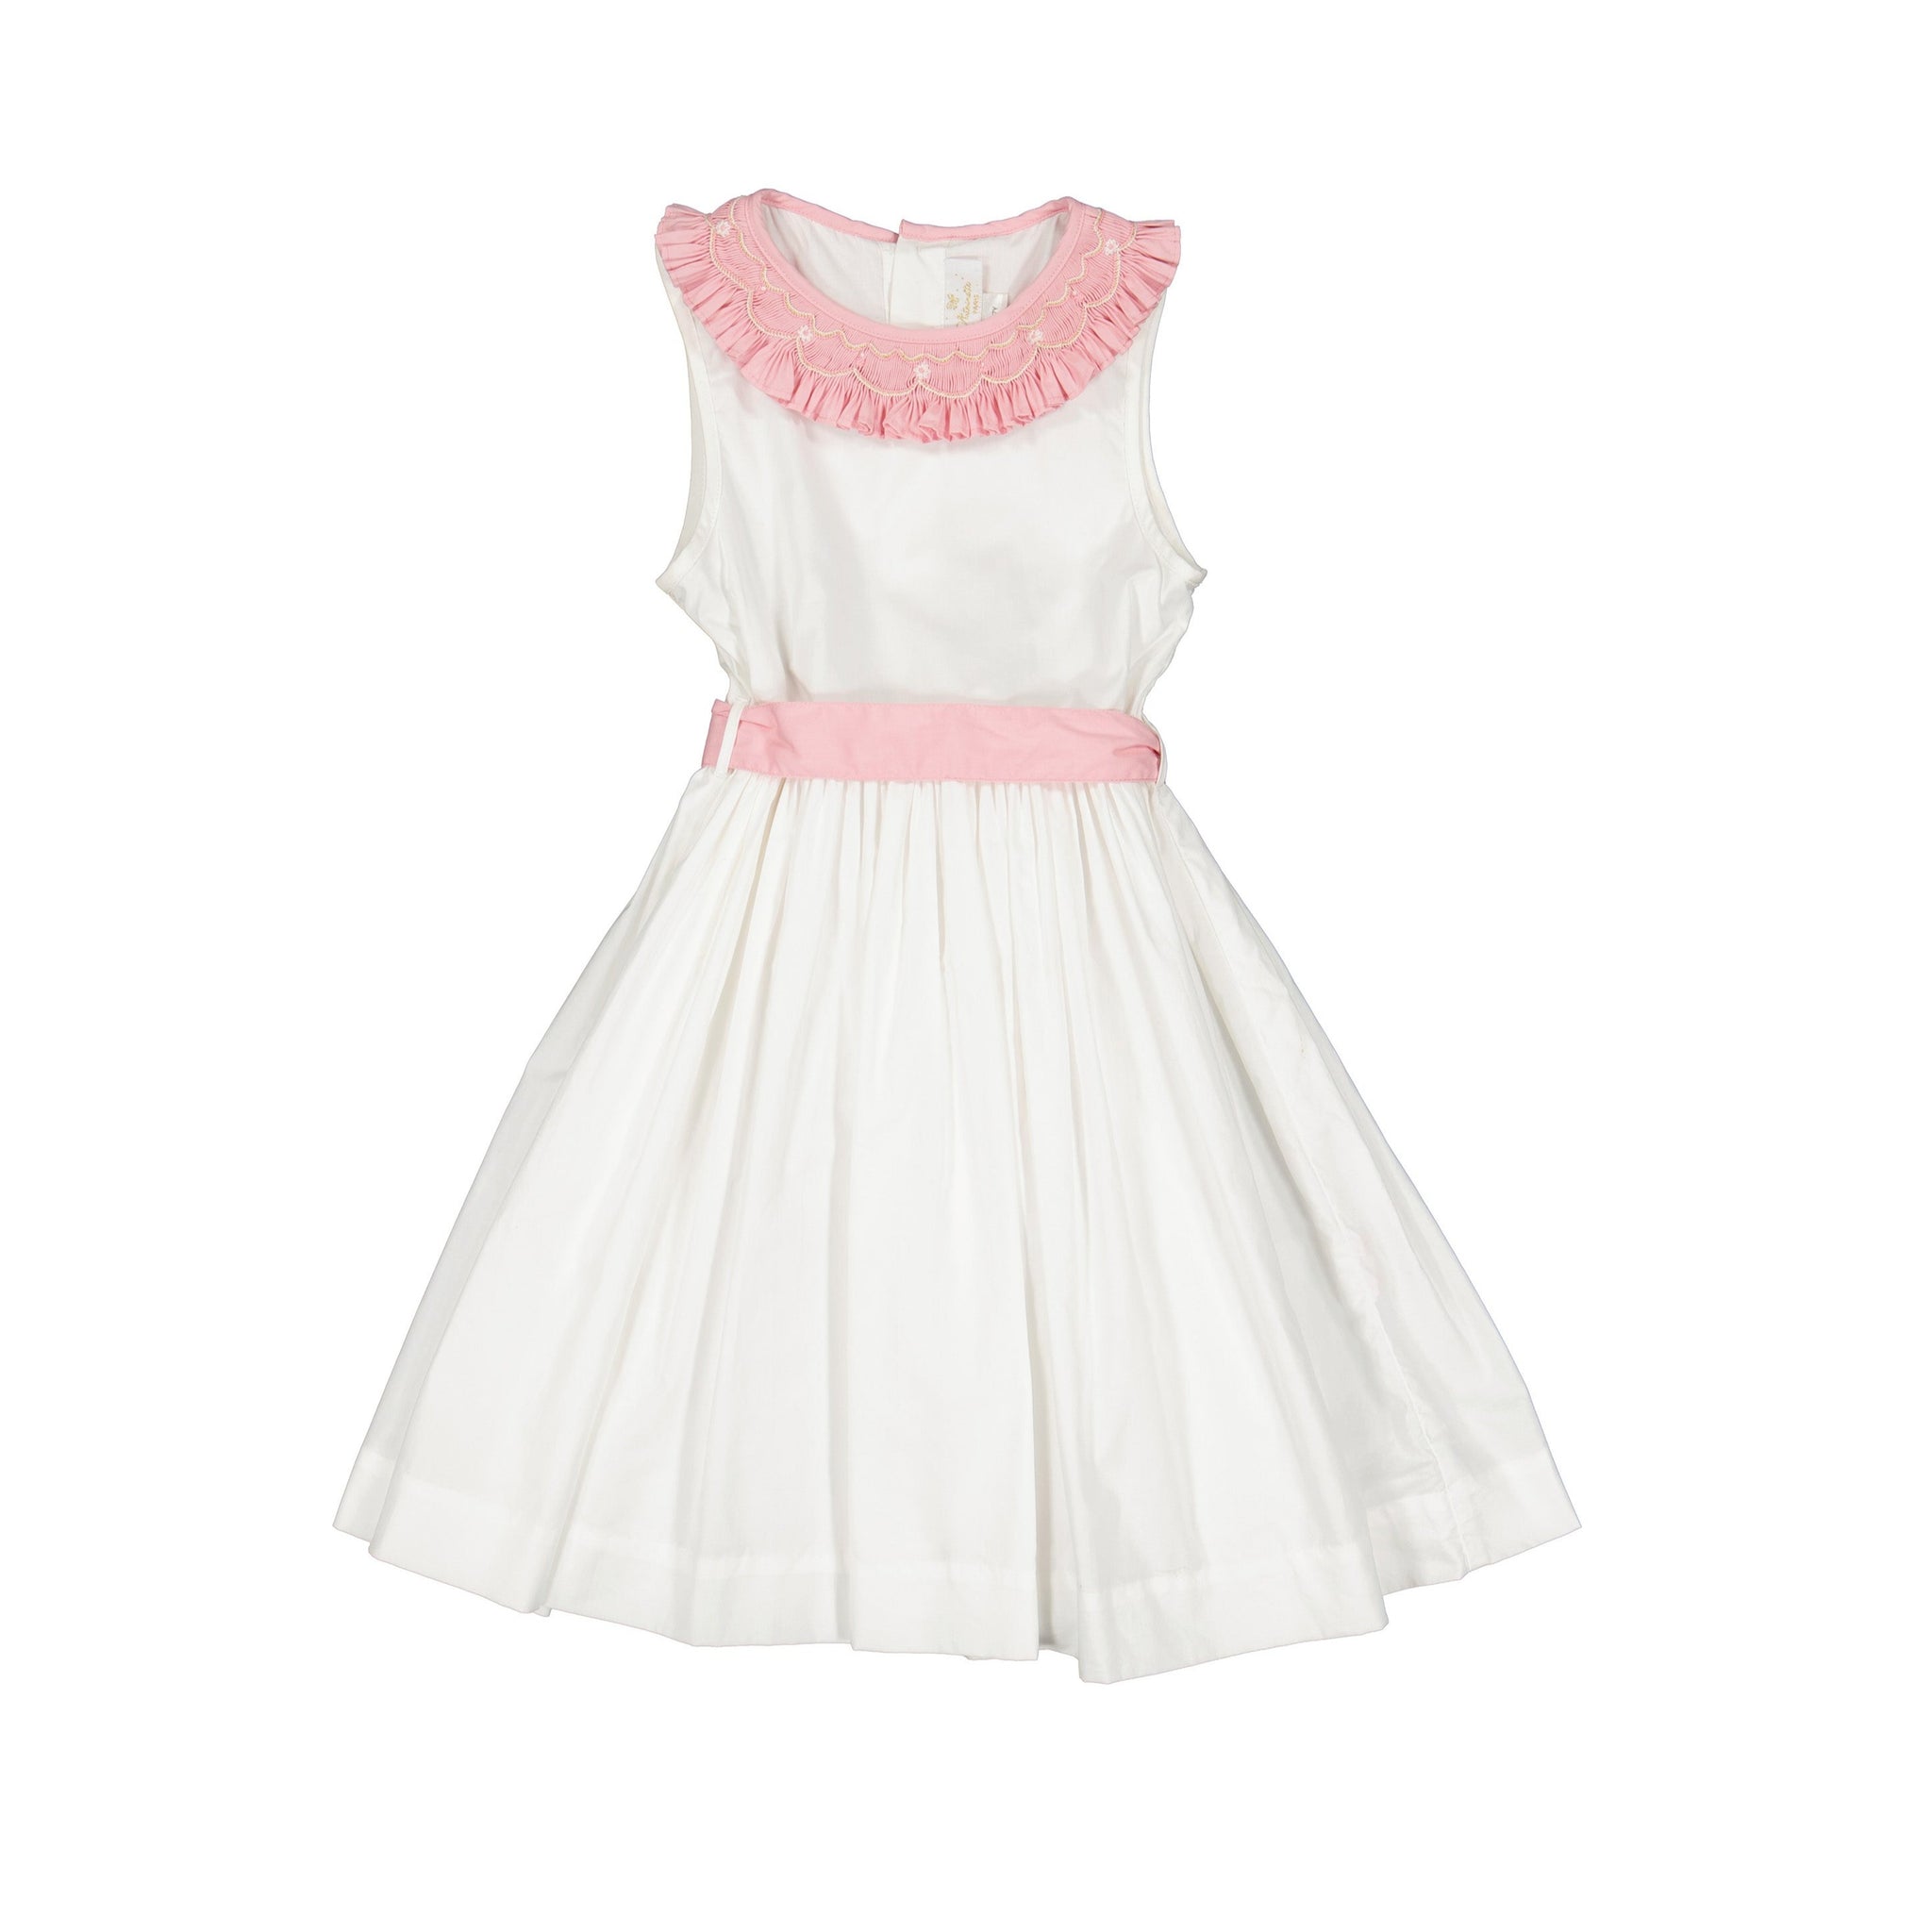 PEONY WHITE SMOCKED DRESS WITH PINK EMBROIDERED COLLAR